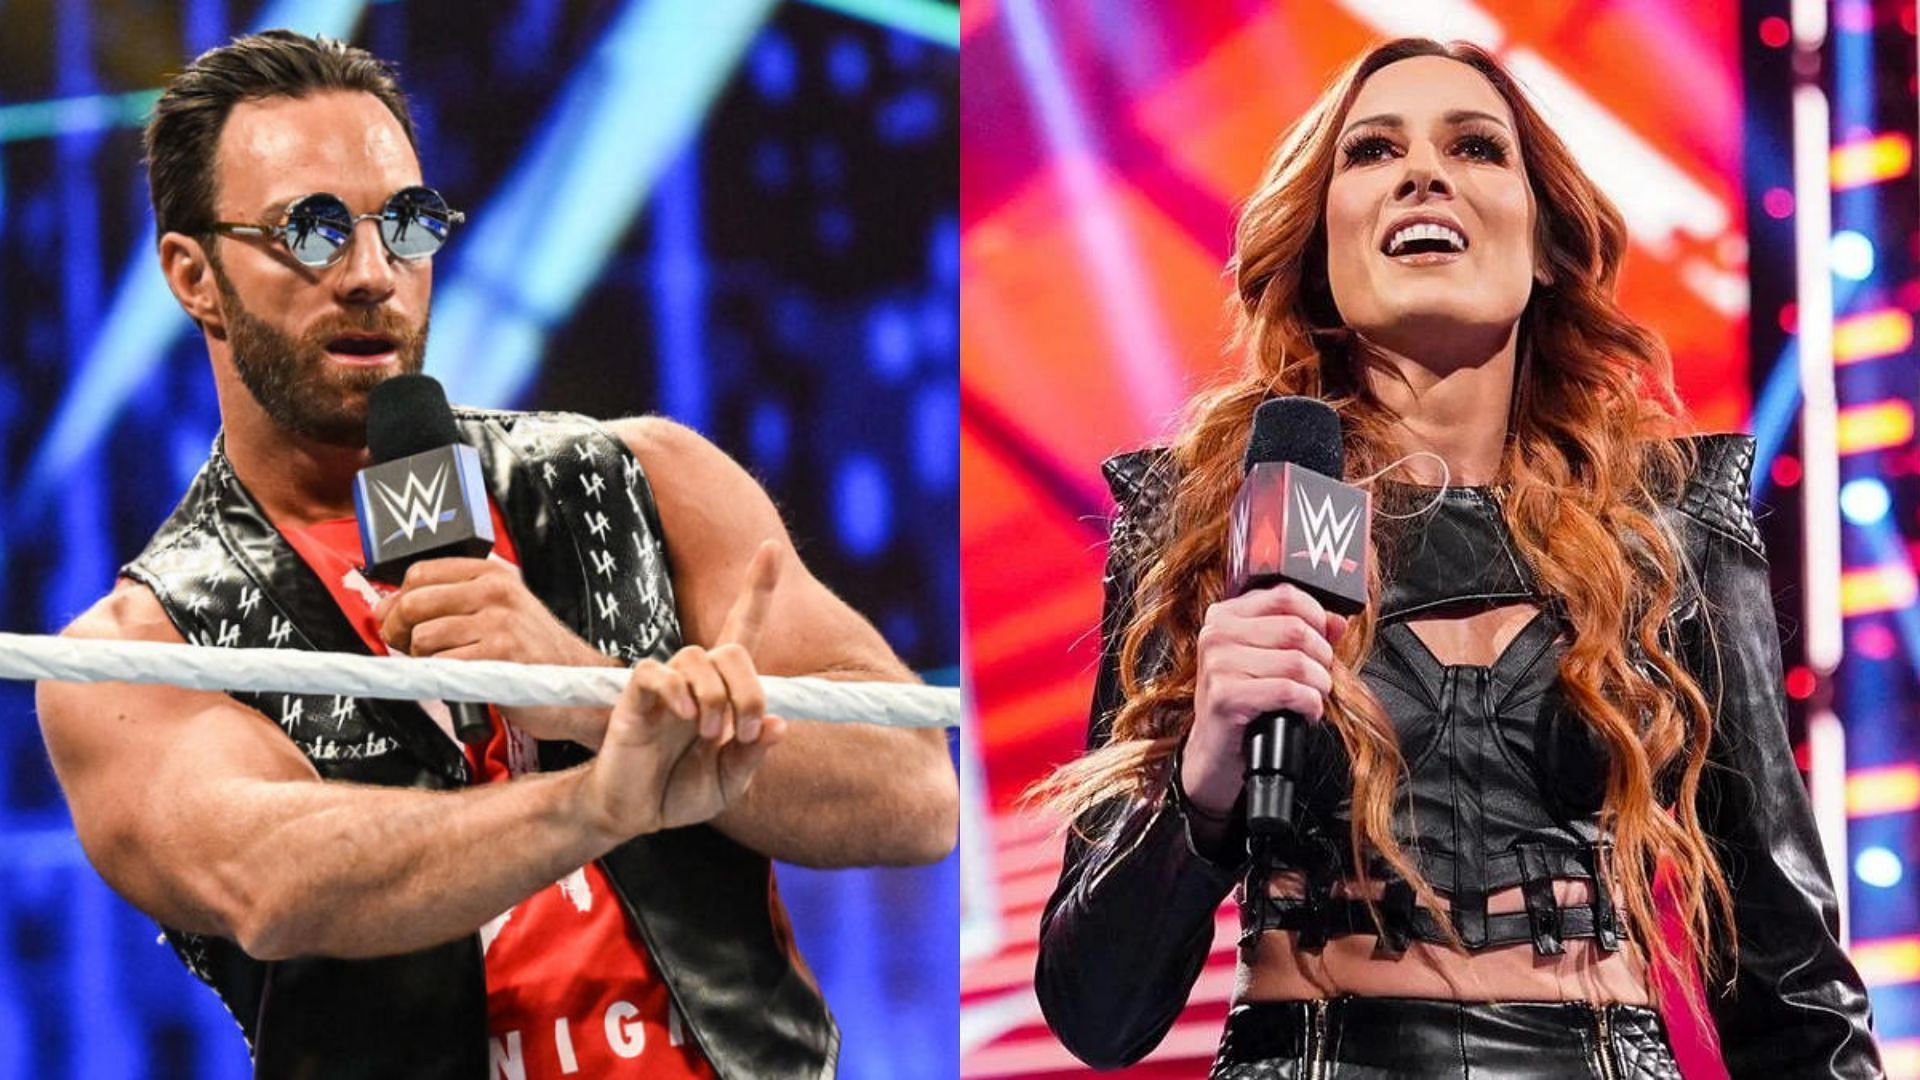 LA Knight also addressed his old photos with Becky Lynch